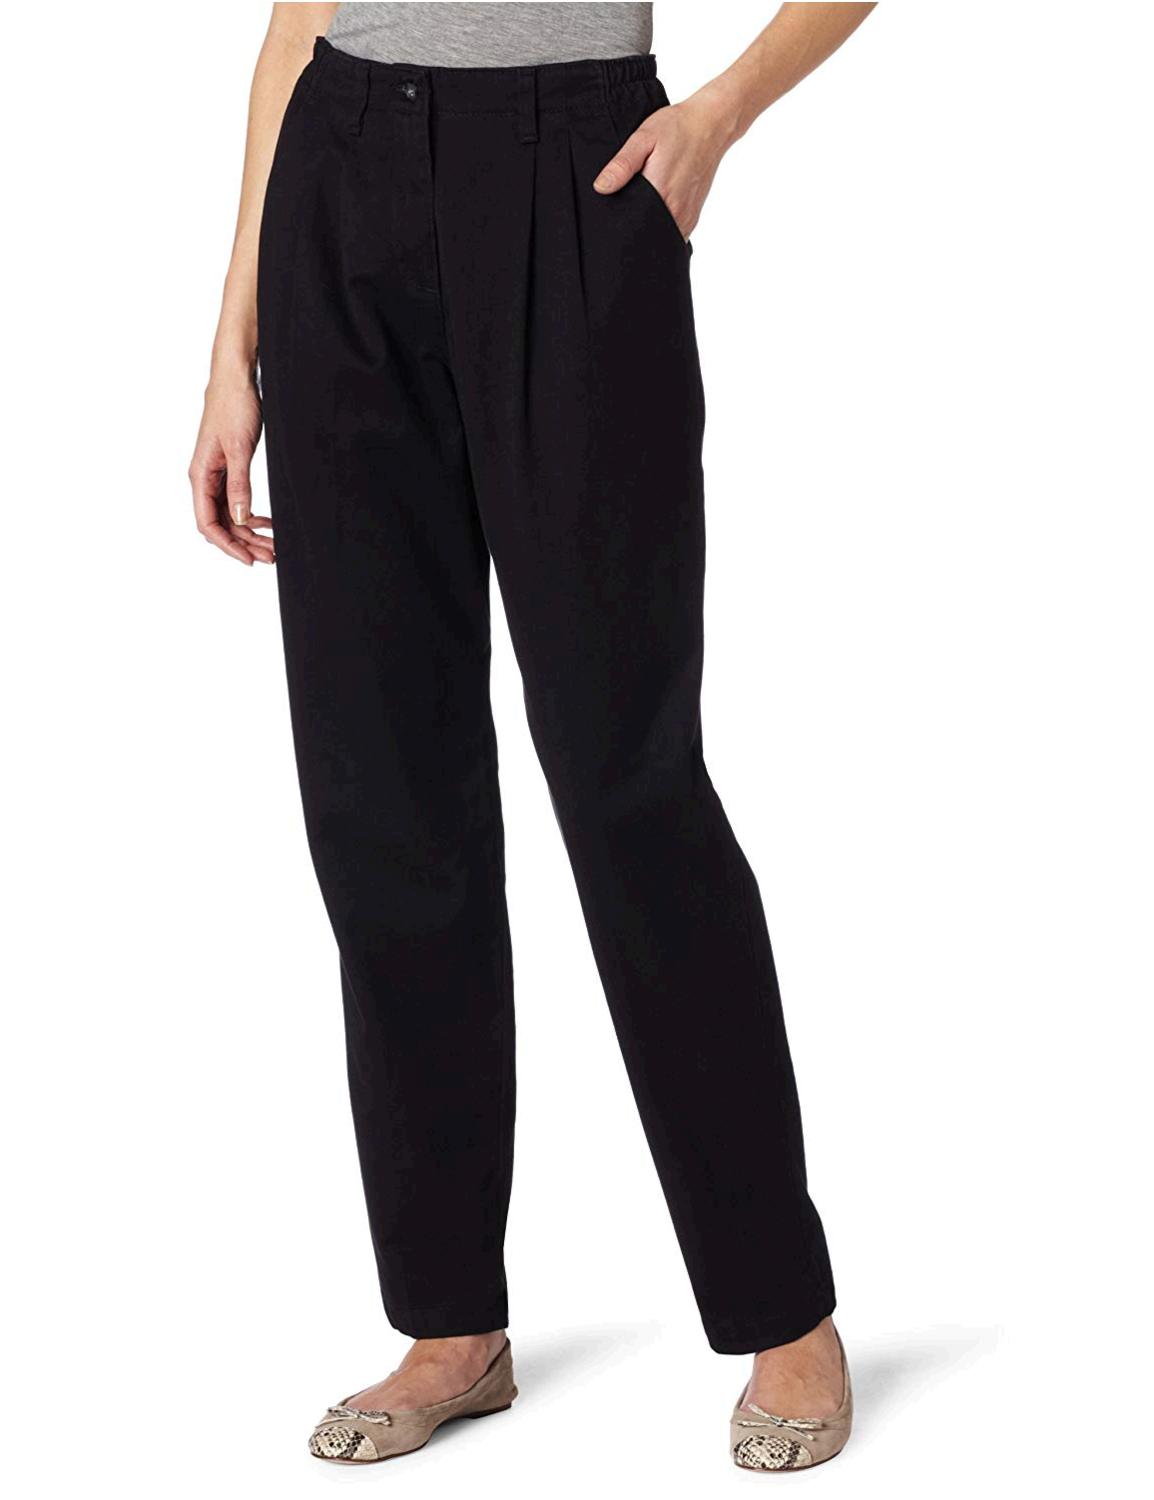 Lee Women's Relaxed Fit Side Elastic Pleated Pant, Black, 10, Black ...